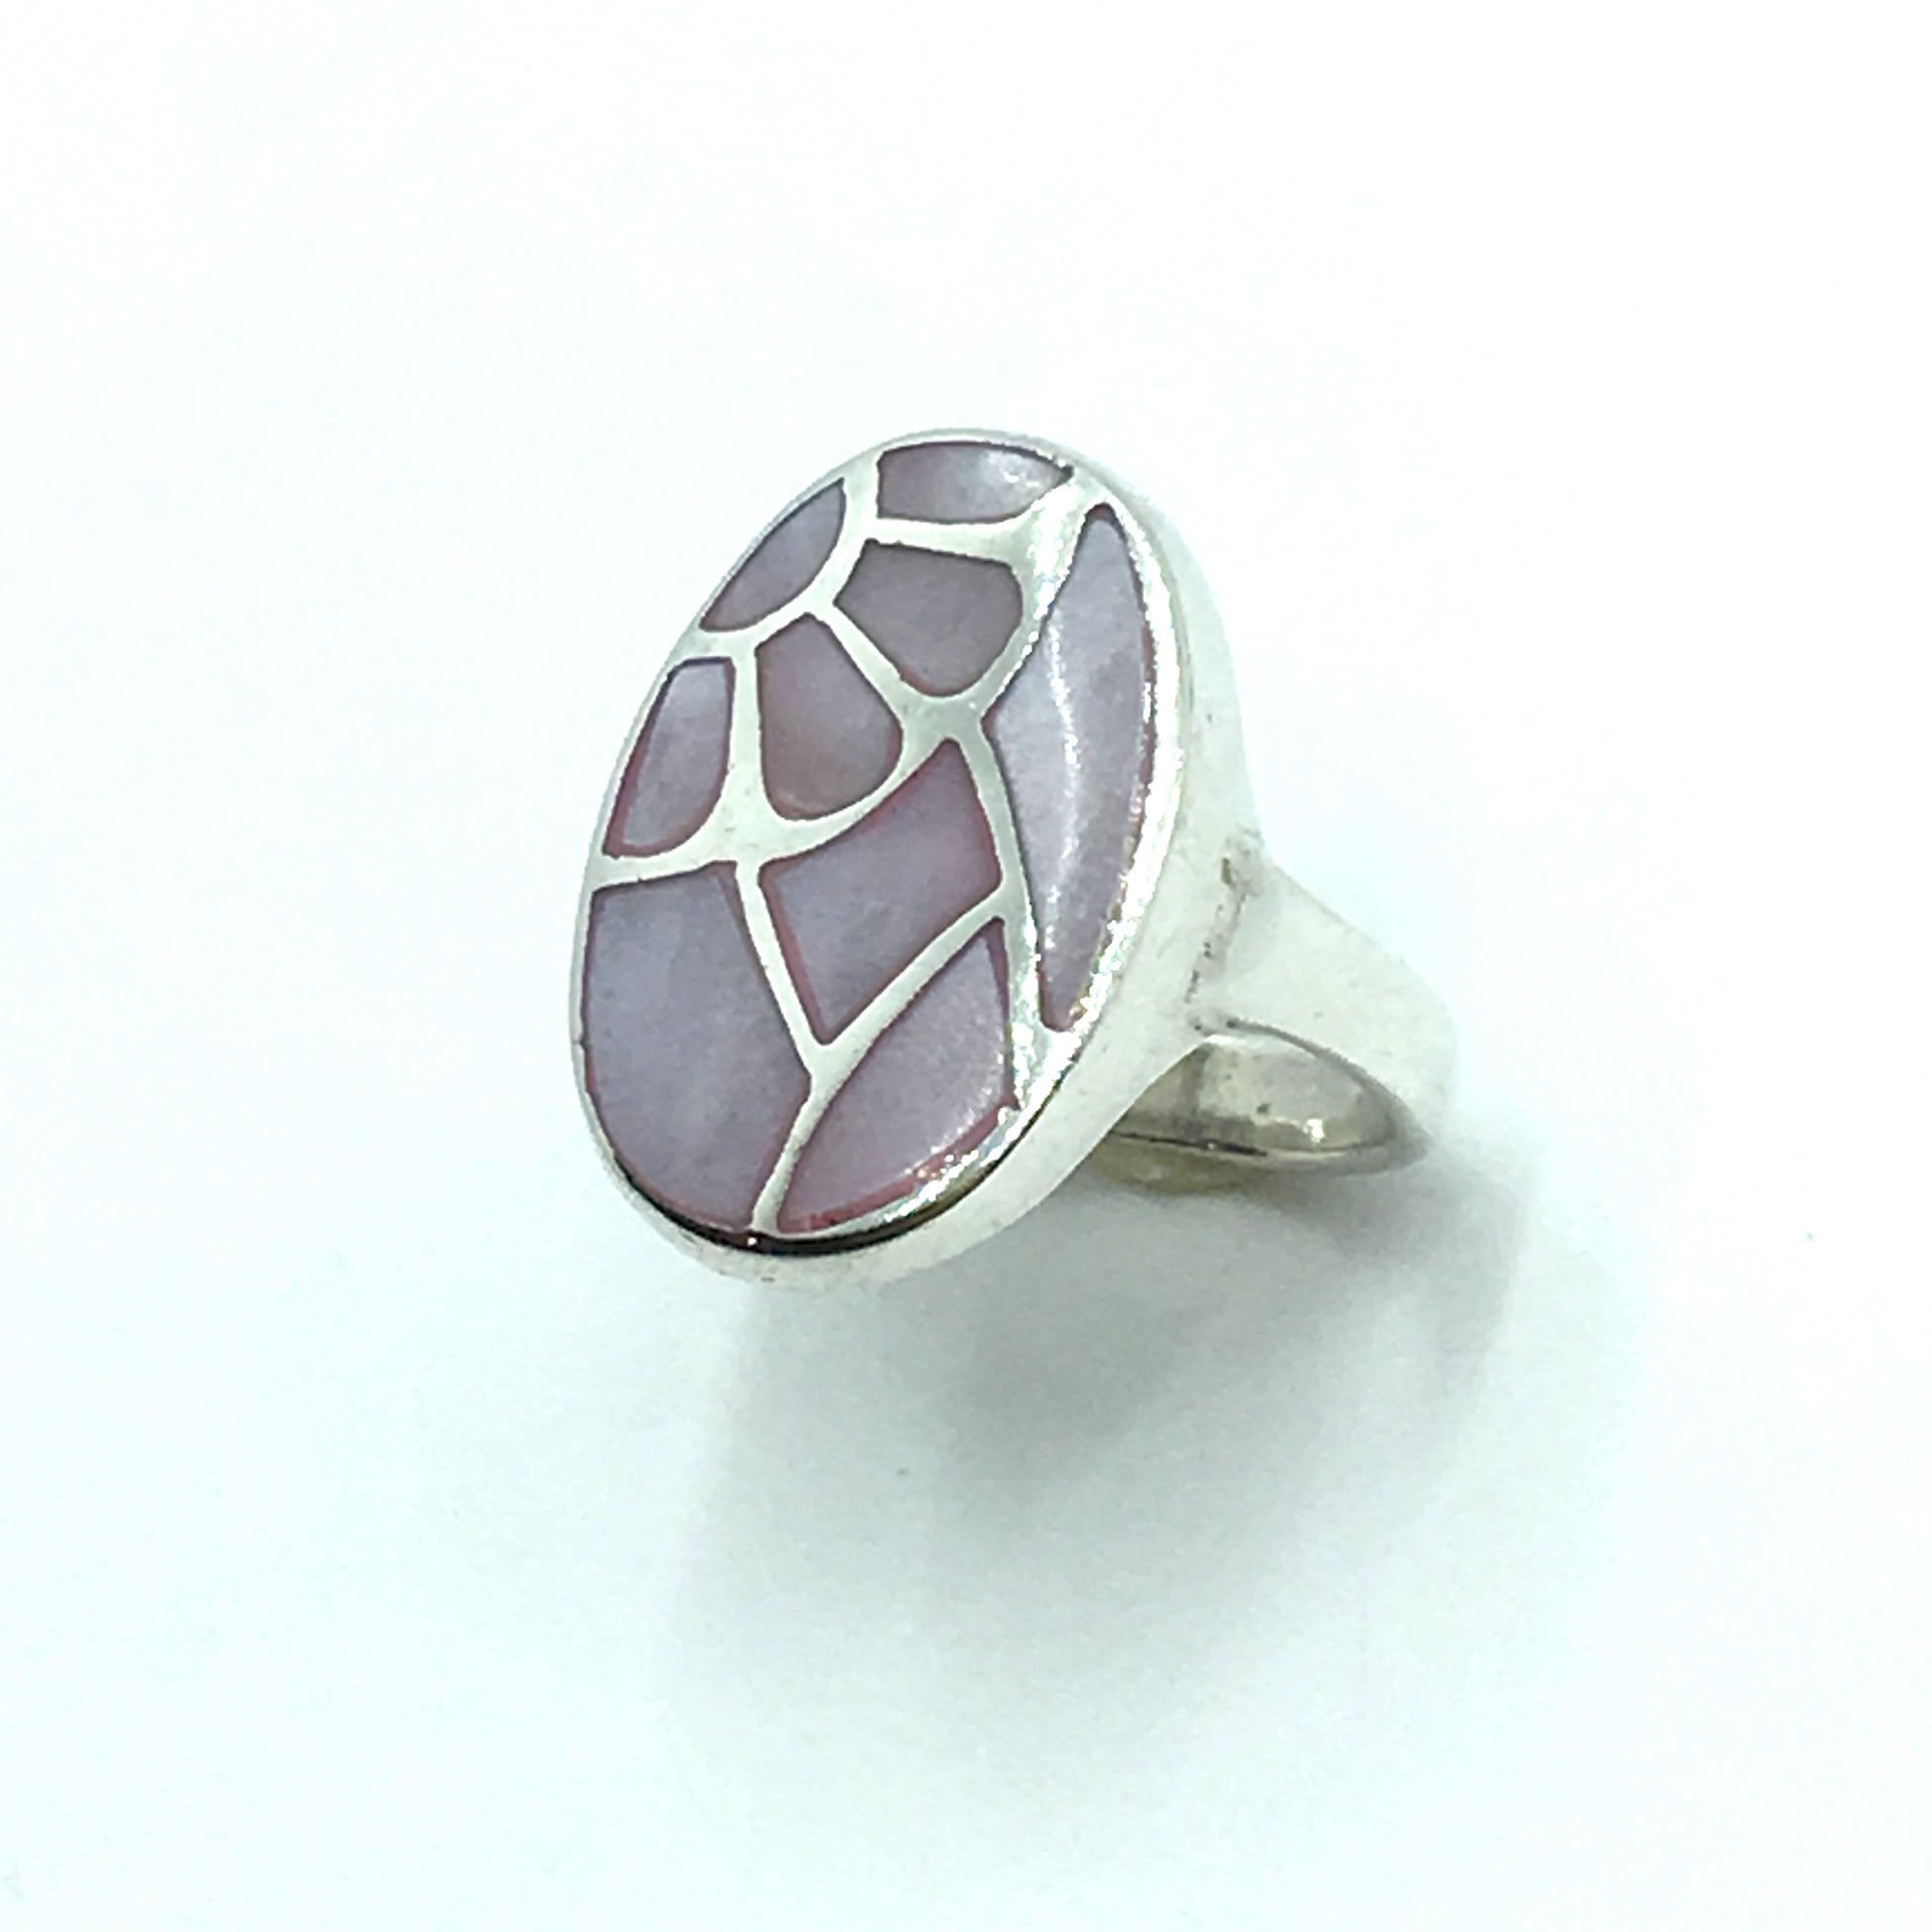 Ring Womens Used Sterling Silver Pink Pearl Geometric Flower Design Oval Ring 